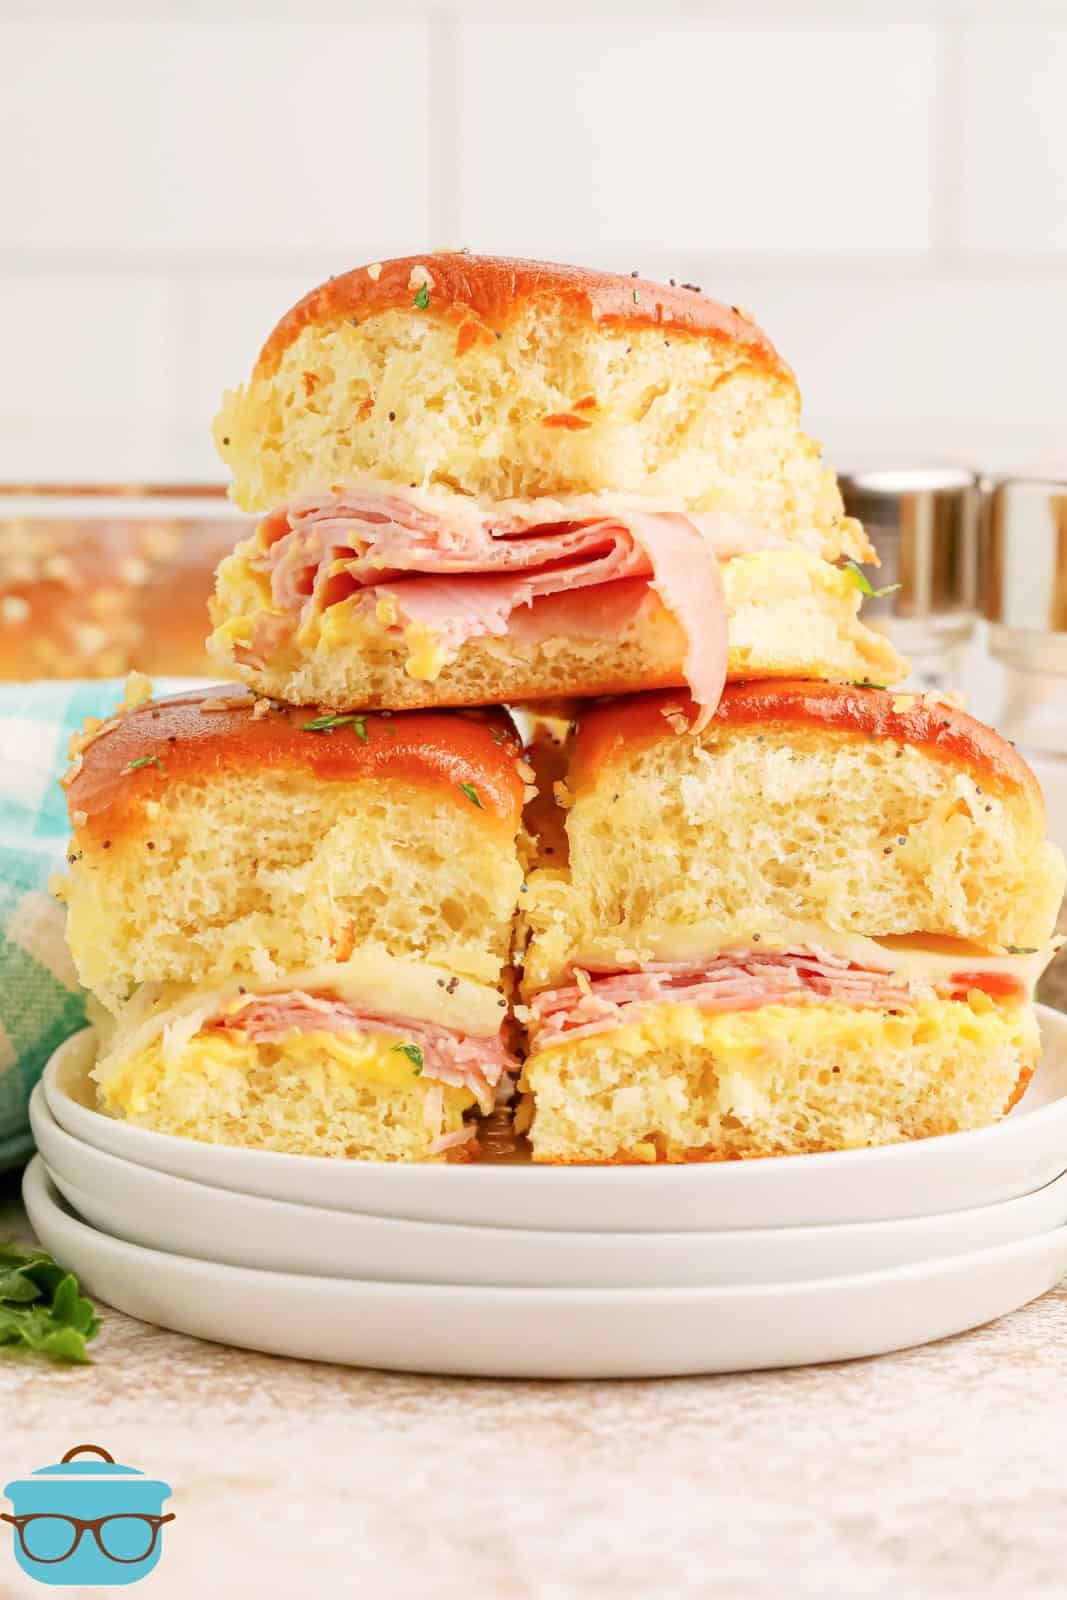 A small pyramid of Honey Mustard Ham Sliders on a serving plate.